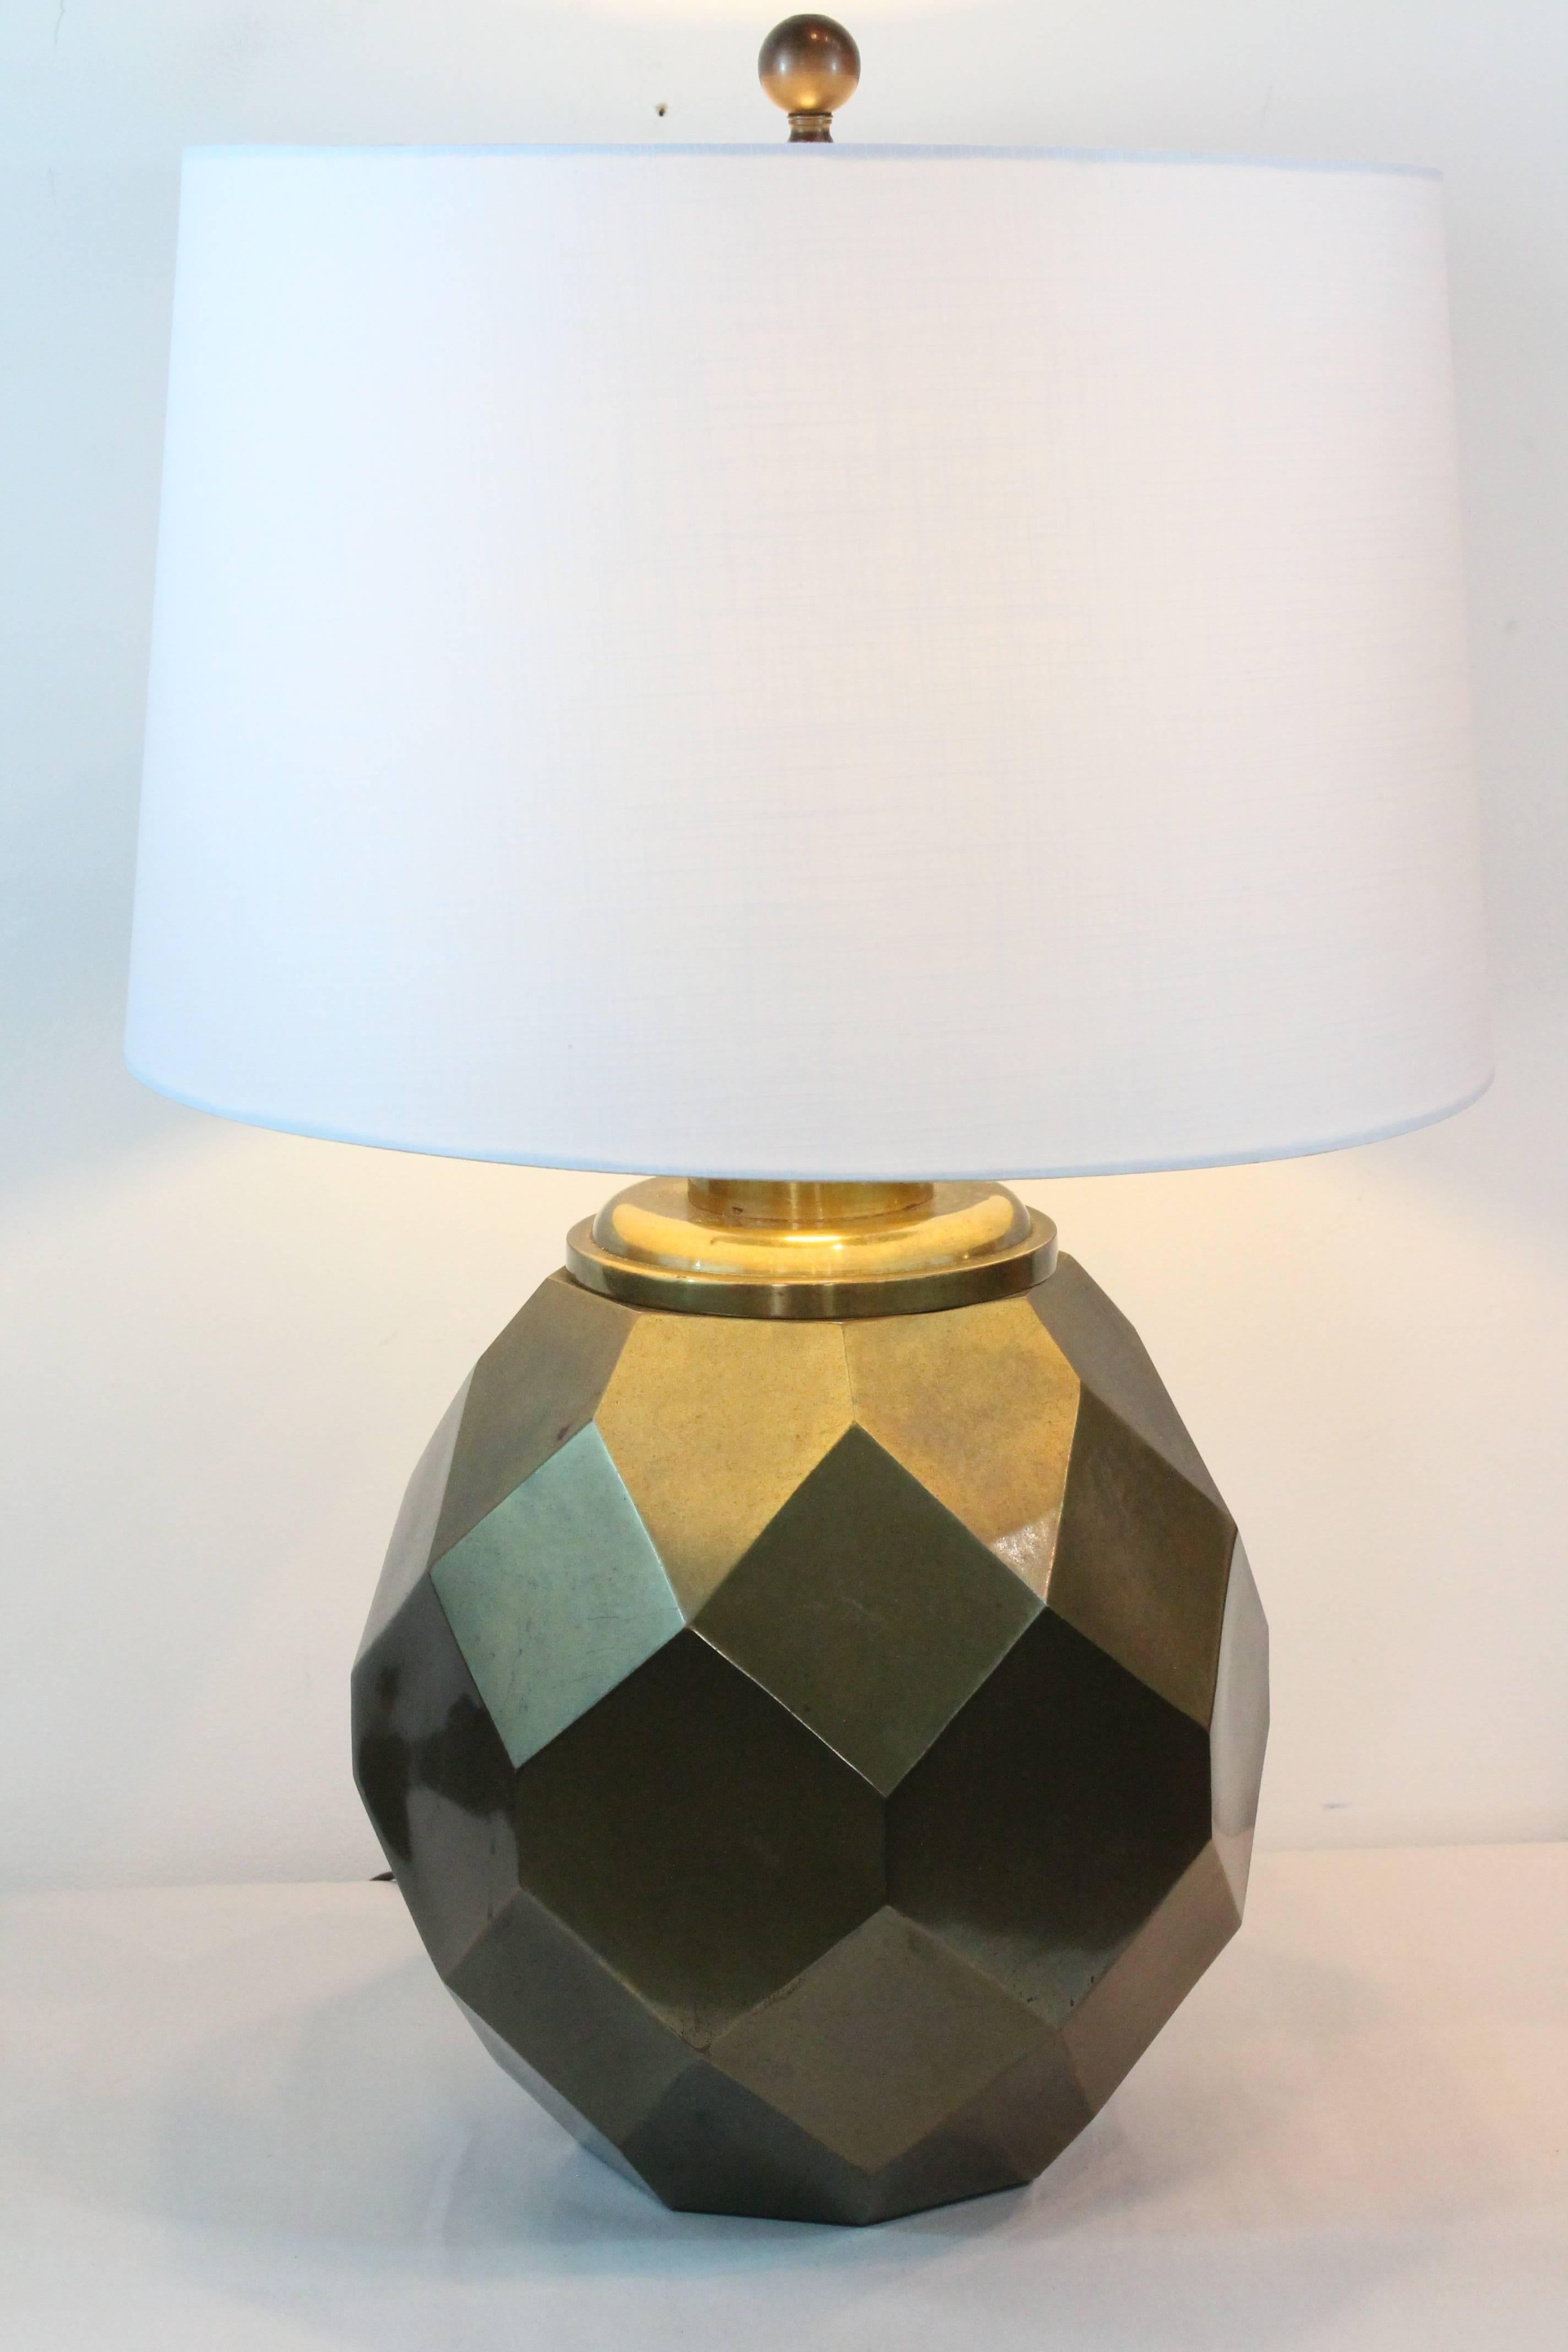 Great graphic sculptural mid-20th century brass geodesic lamp.
Shade not included.